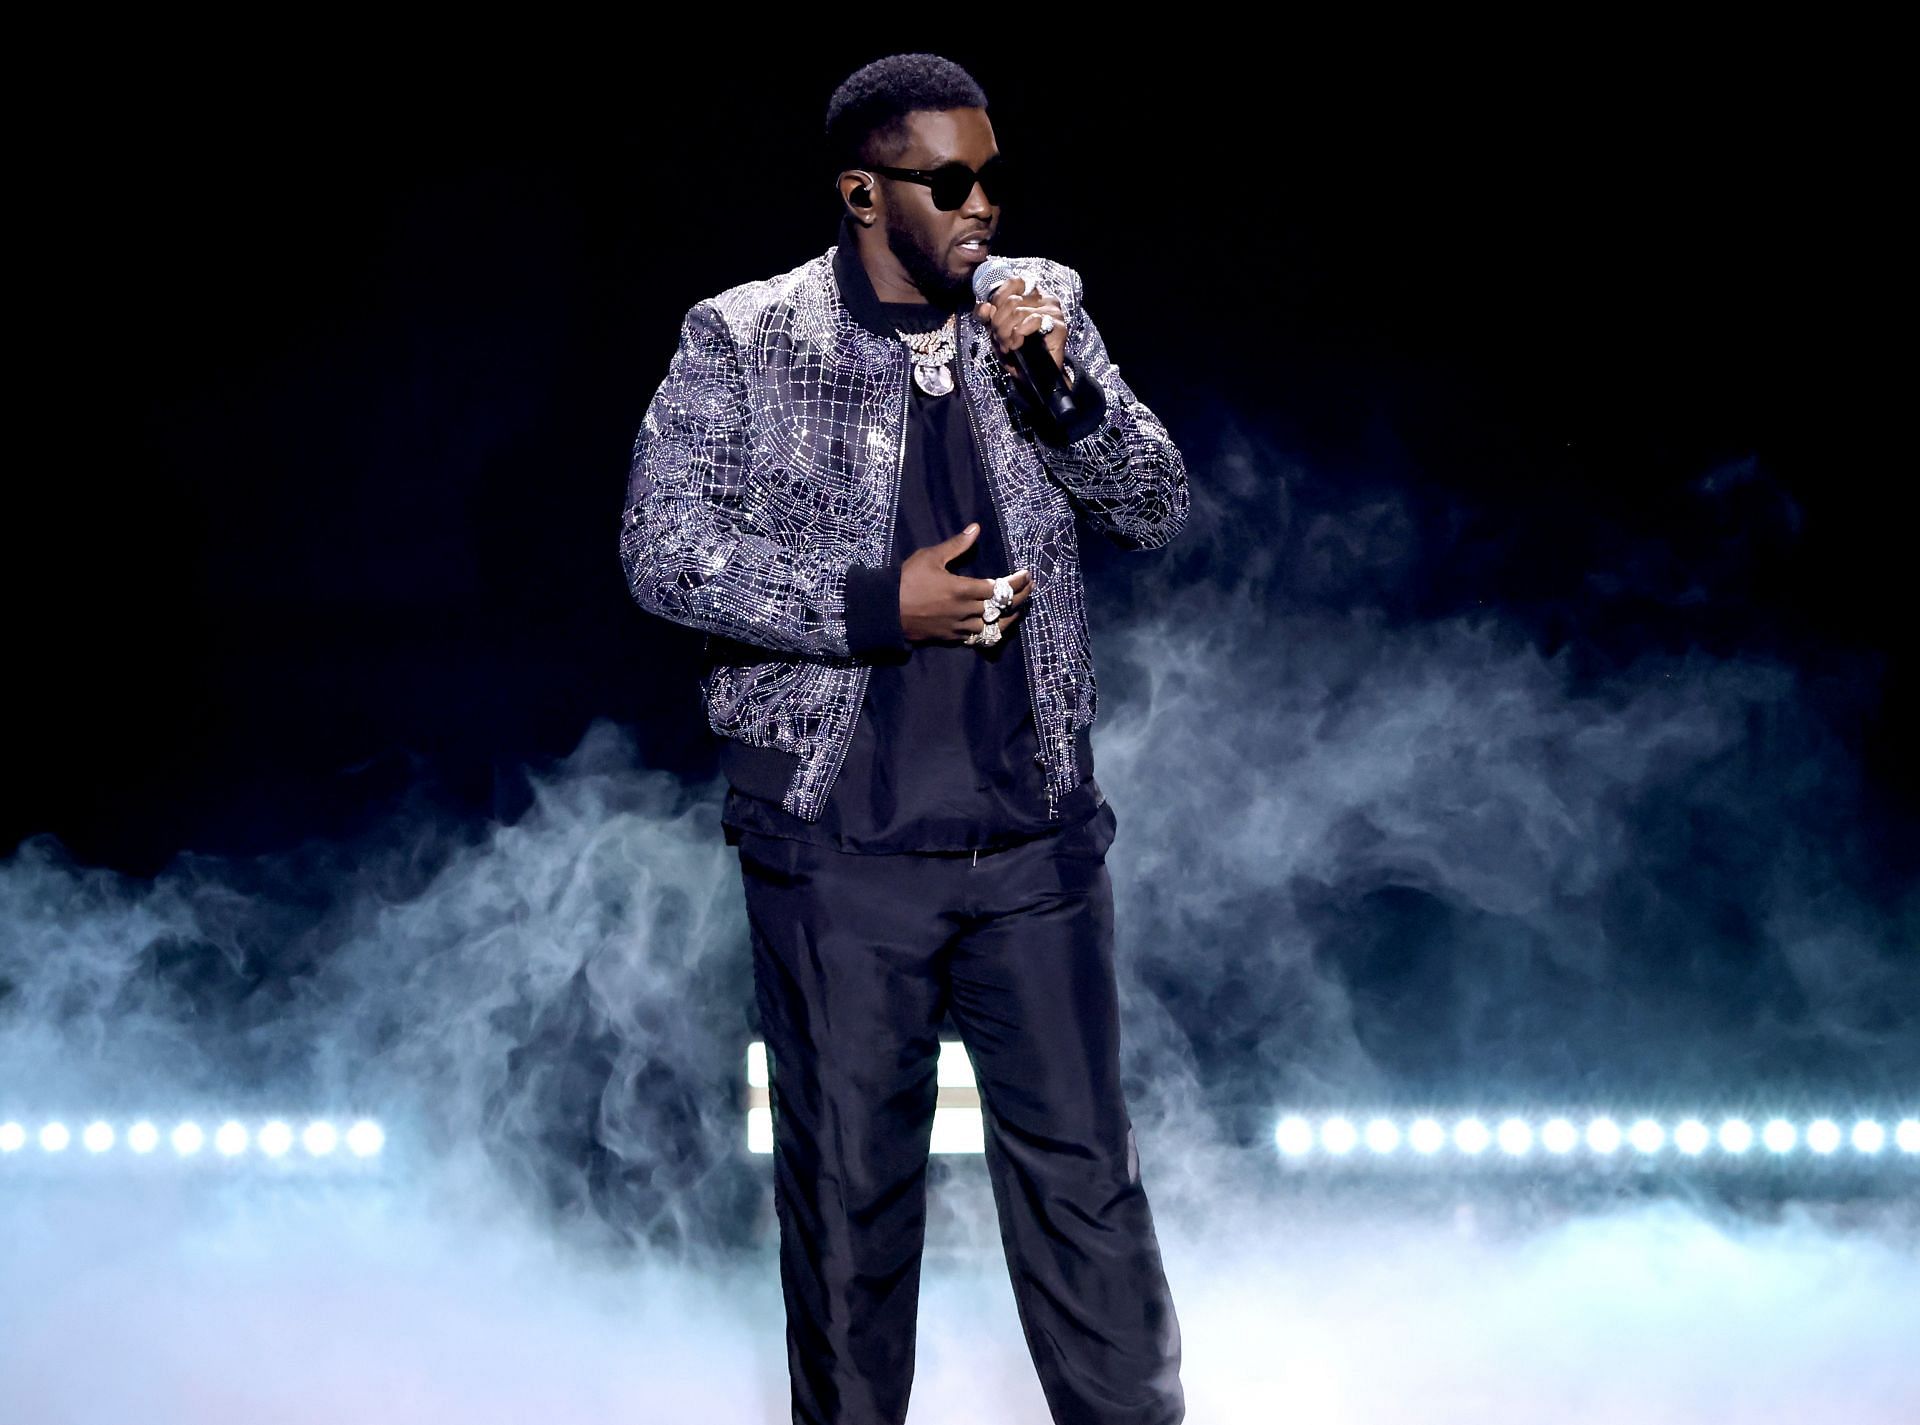 Sean Combs at 2022 iHeartRadio Music Festival - Night 2 - Show (Photo by Kevin Winter/Getty Images for iHeartRadio)